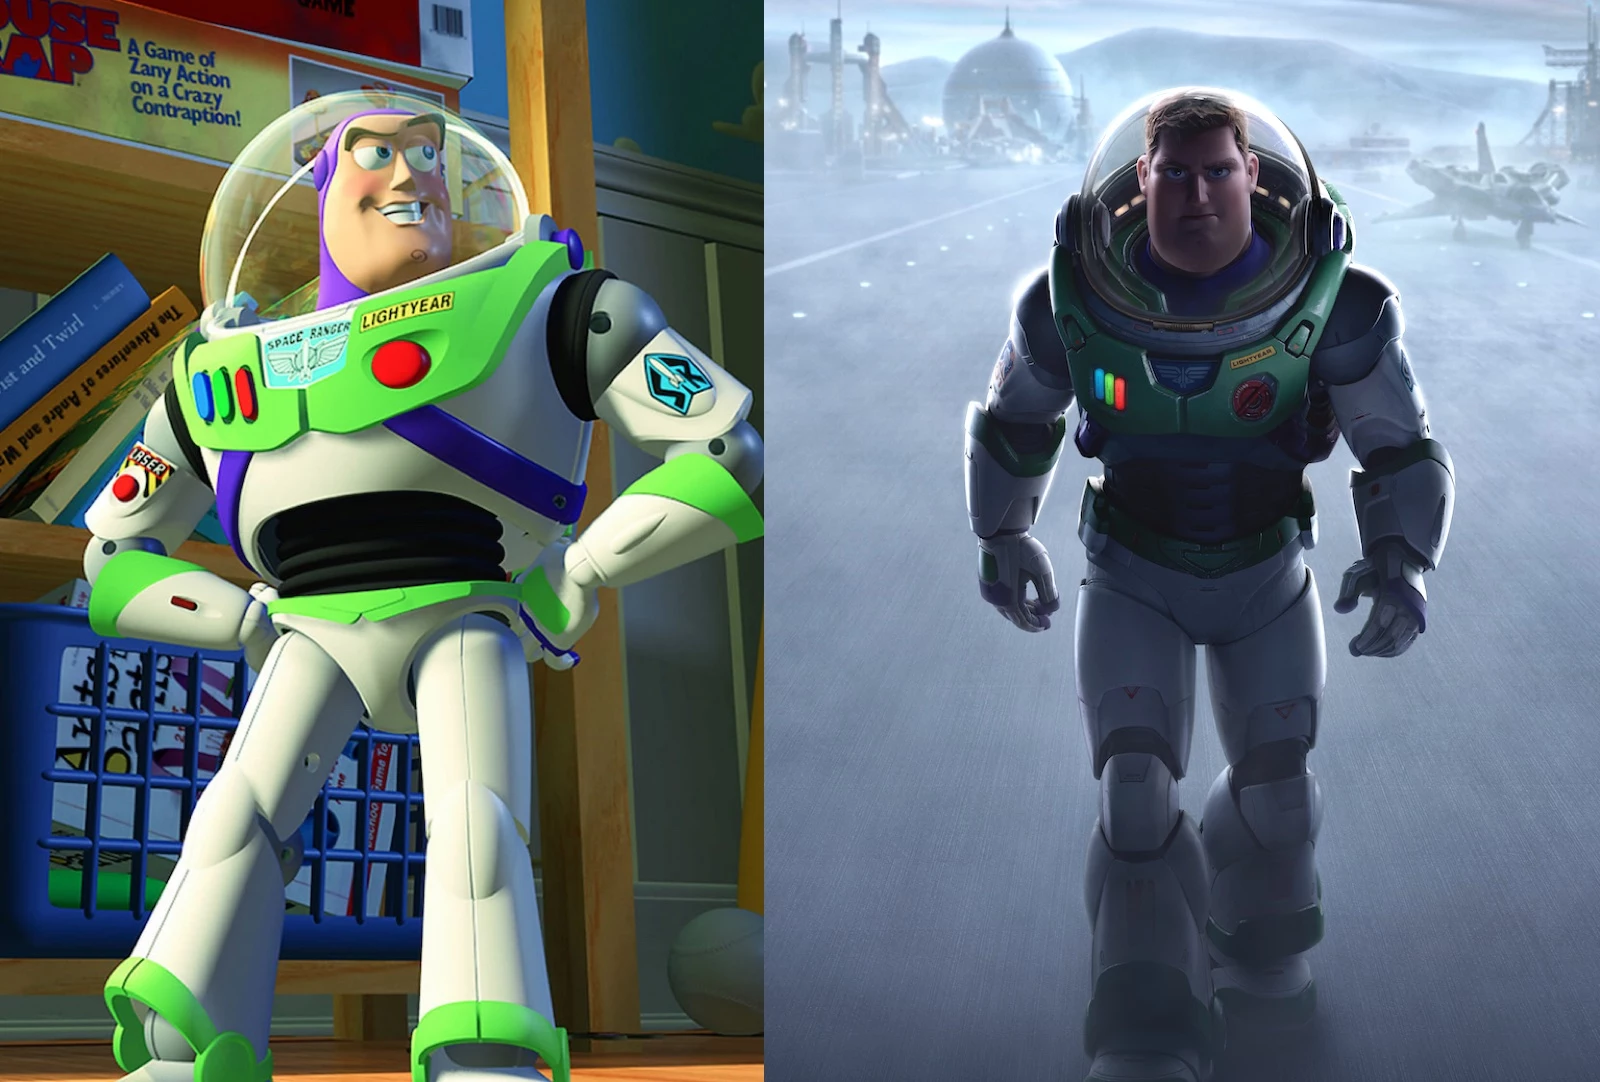 Buzz Lightyear of Star Command (Western Animation) - TV Tropes